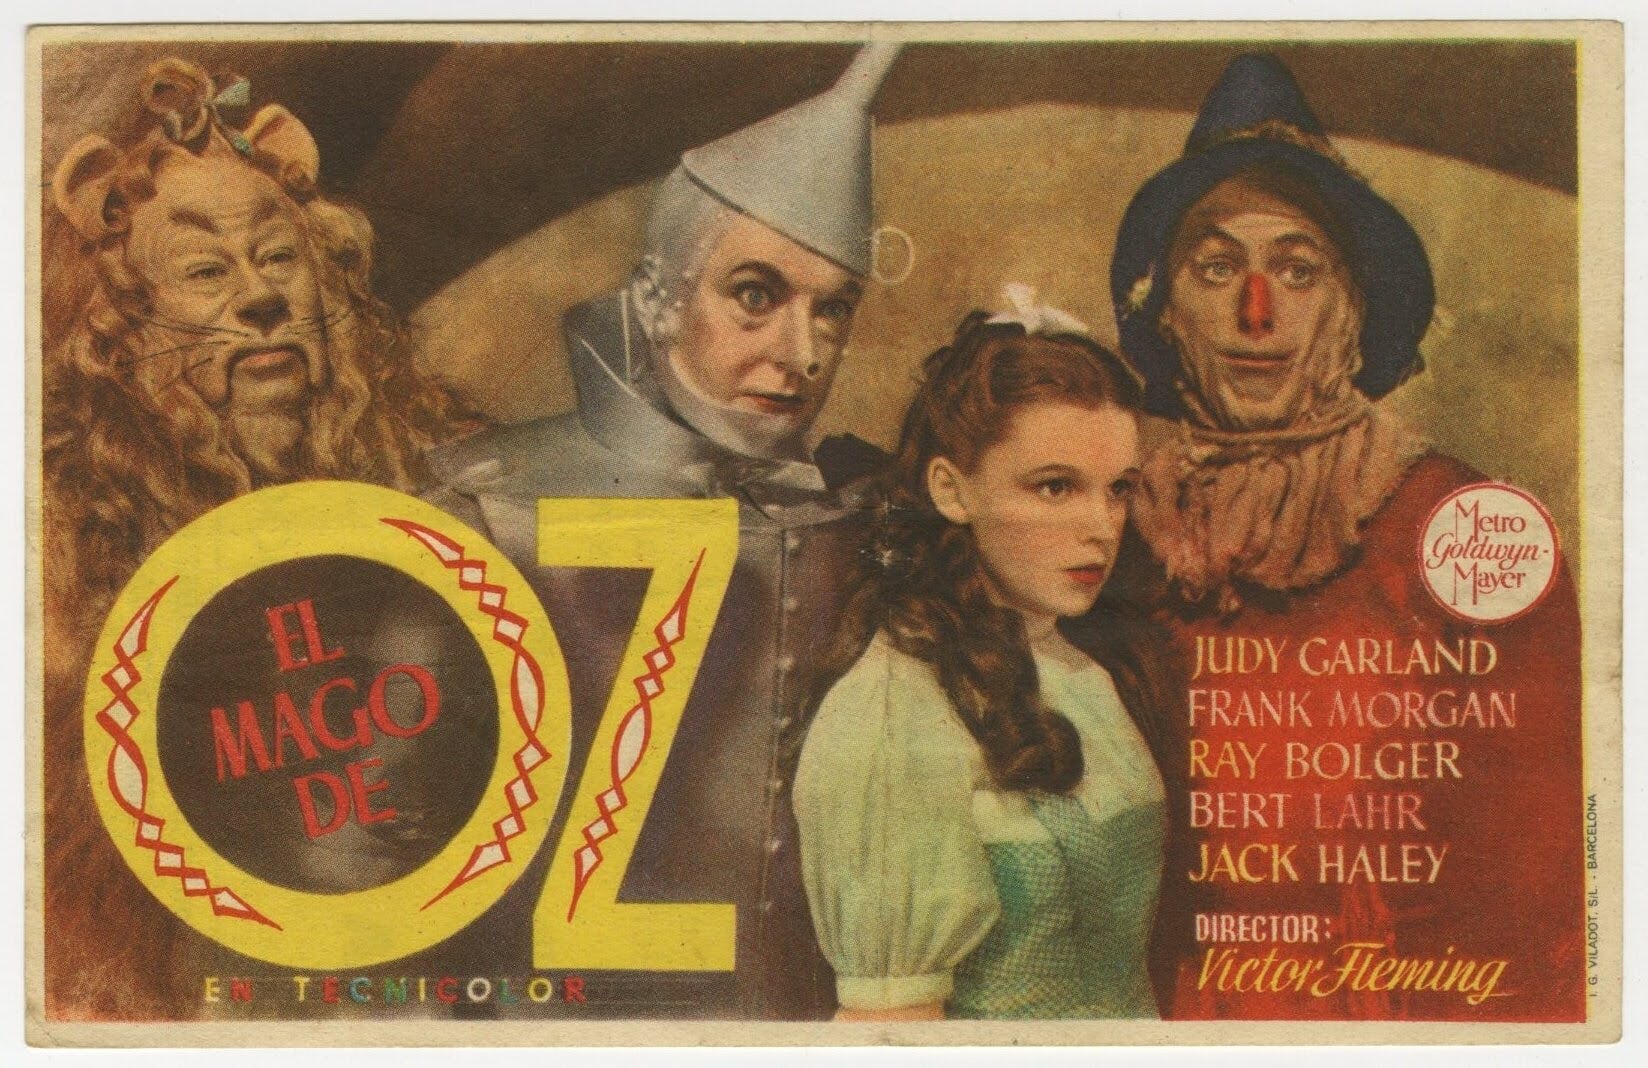 Wizard Of Oz Spanish Herald (R 1945) - posterpalace.com